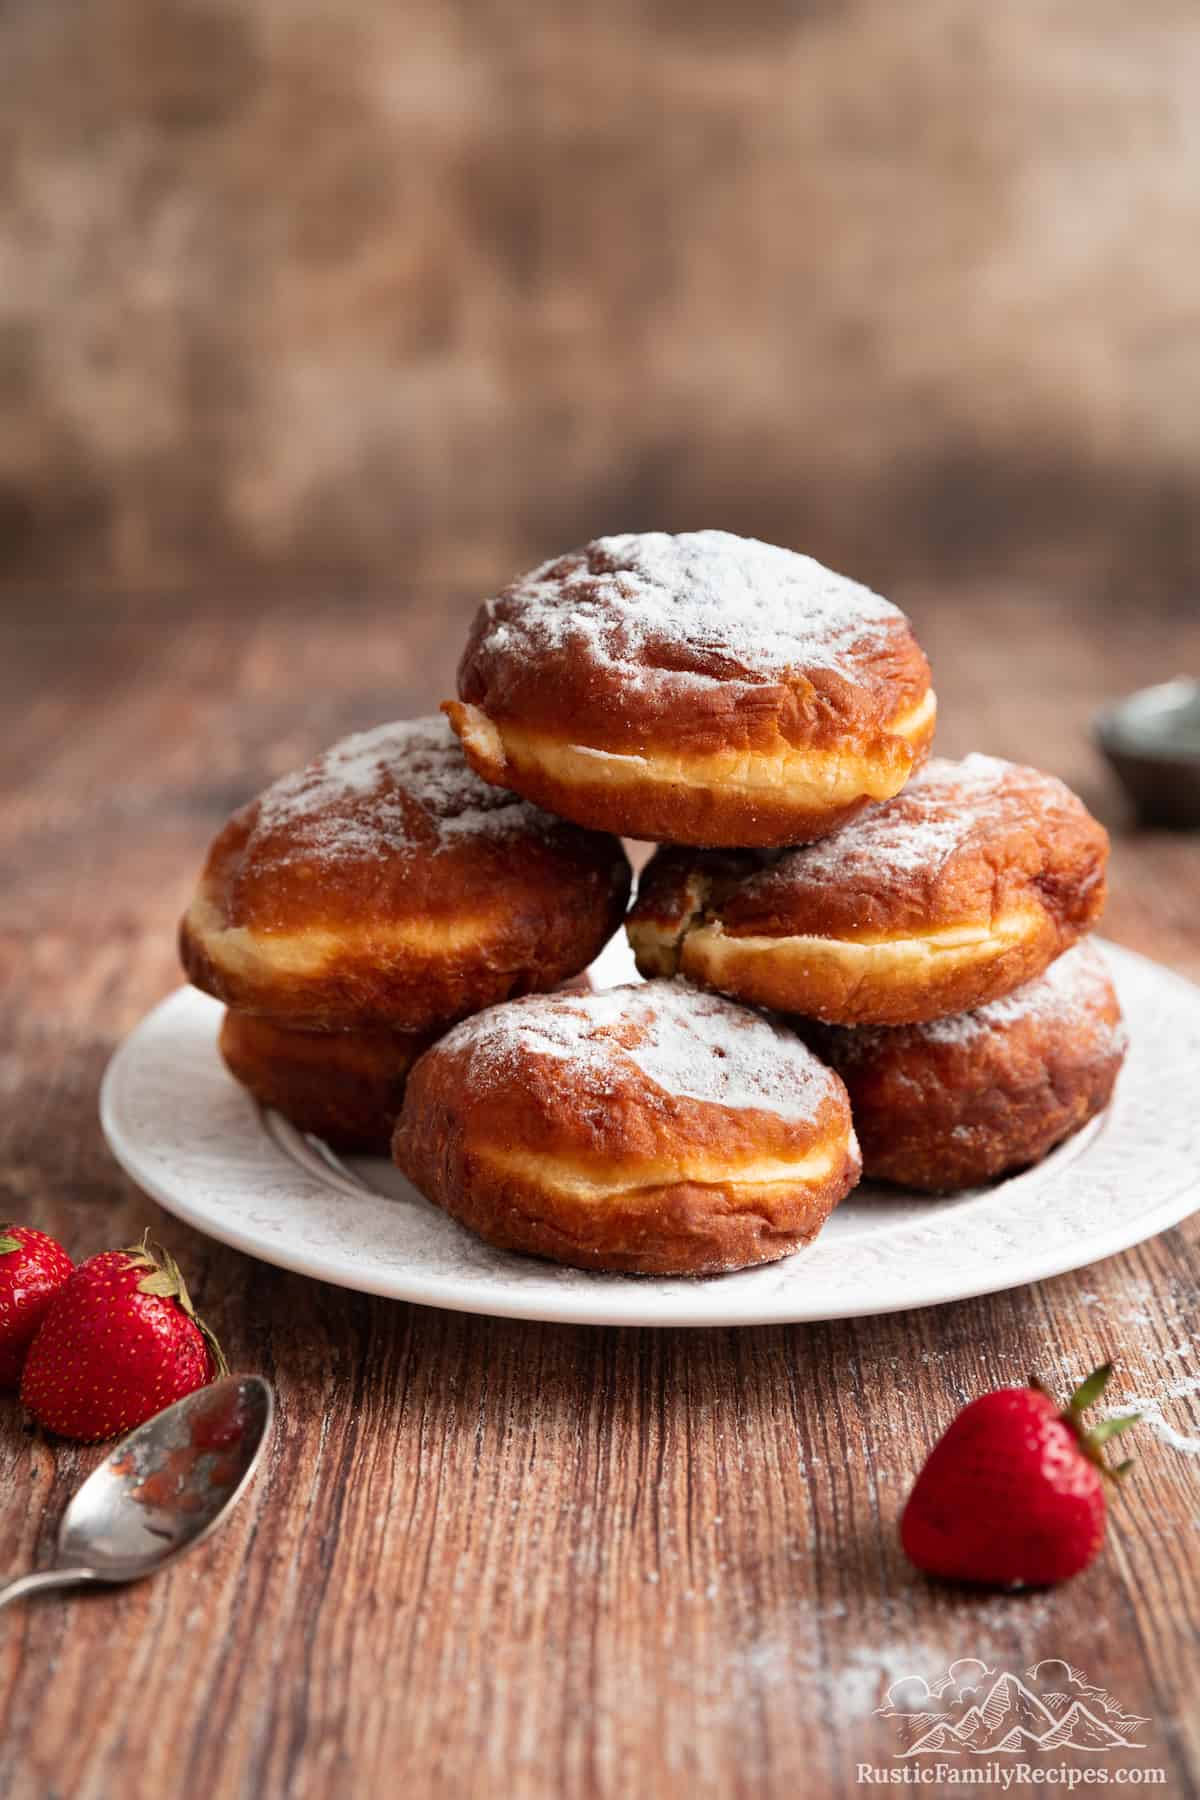 A plate of Polish donuts